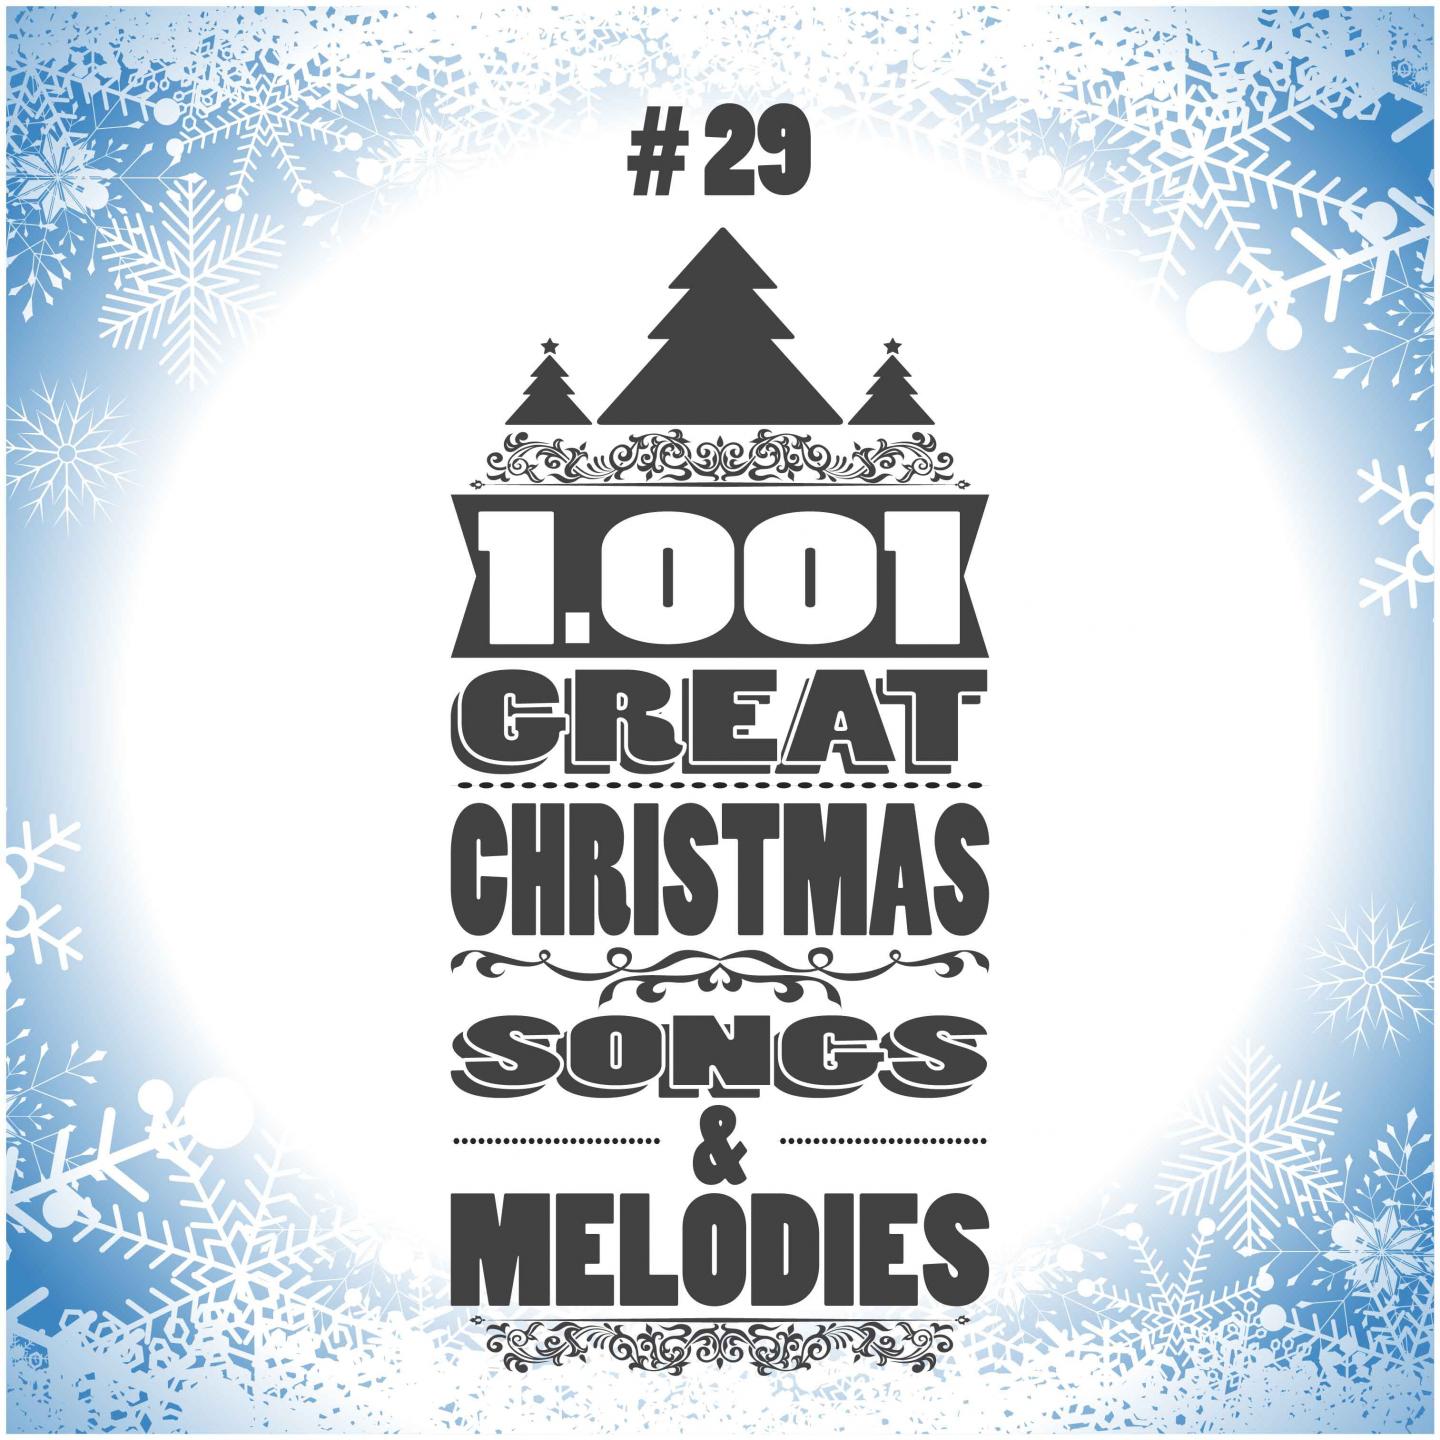 1001 Great Christmas Songs & Melodies, Vol. 29